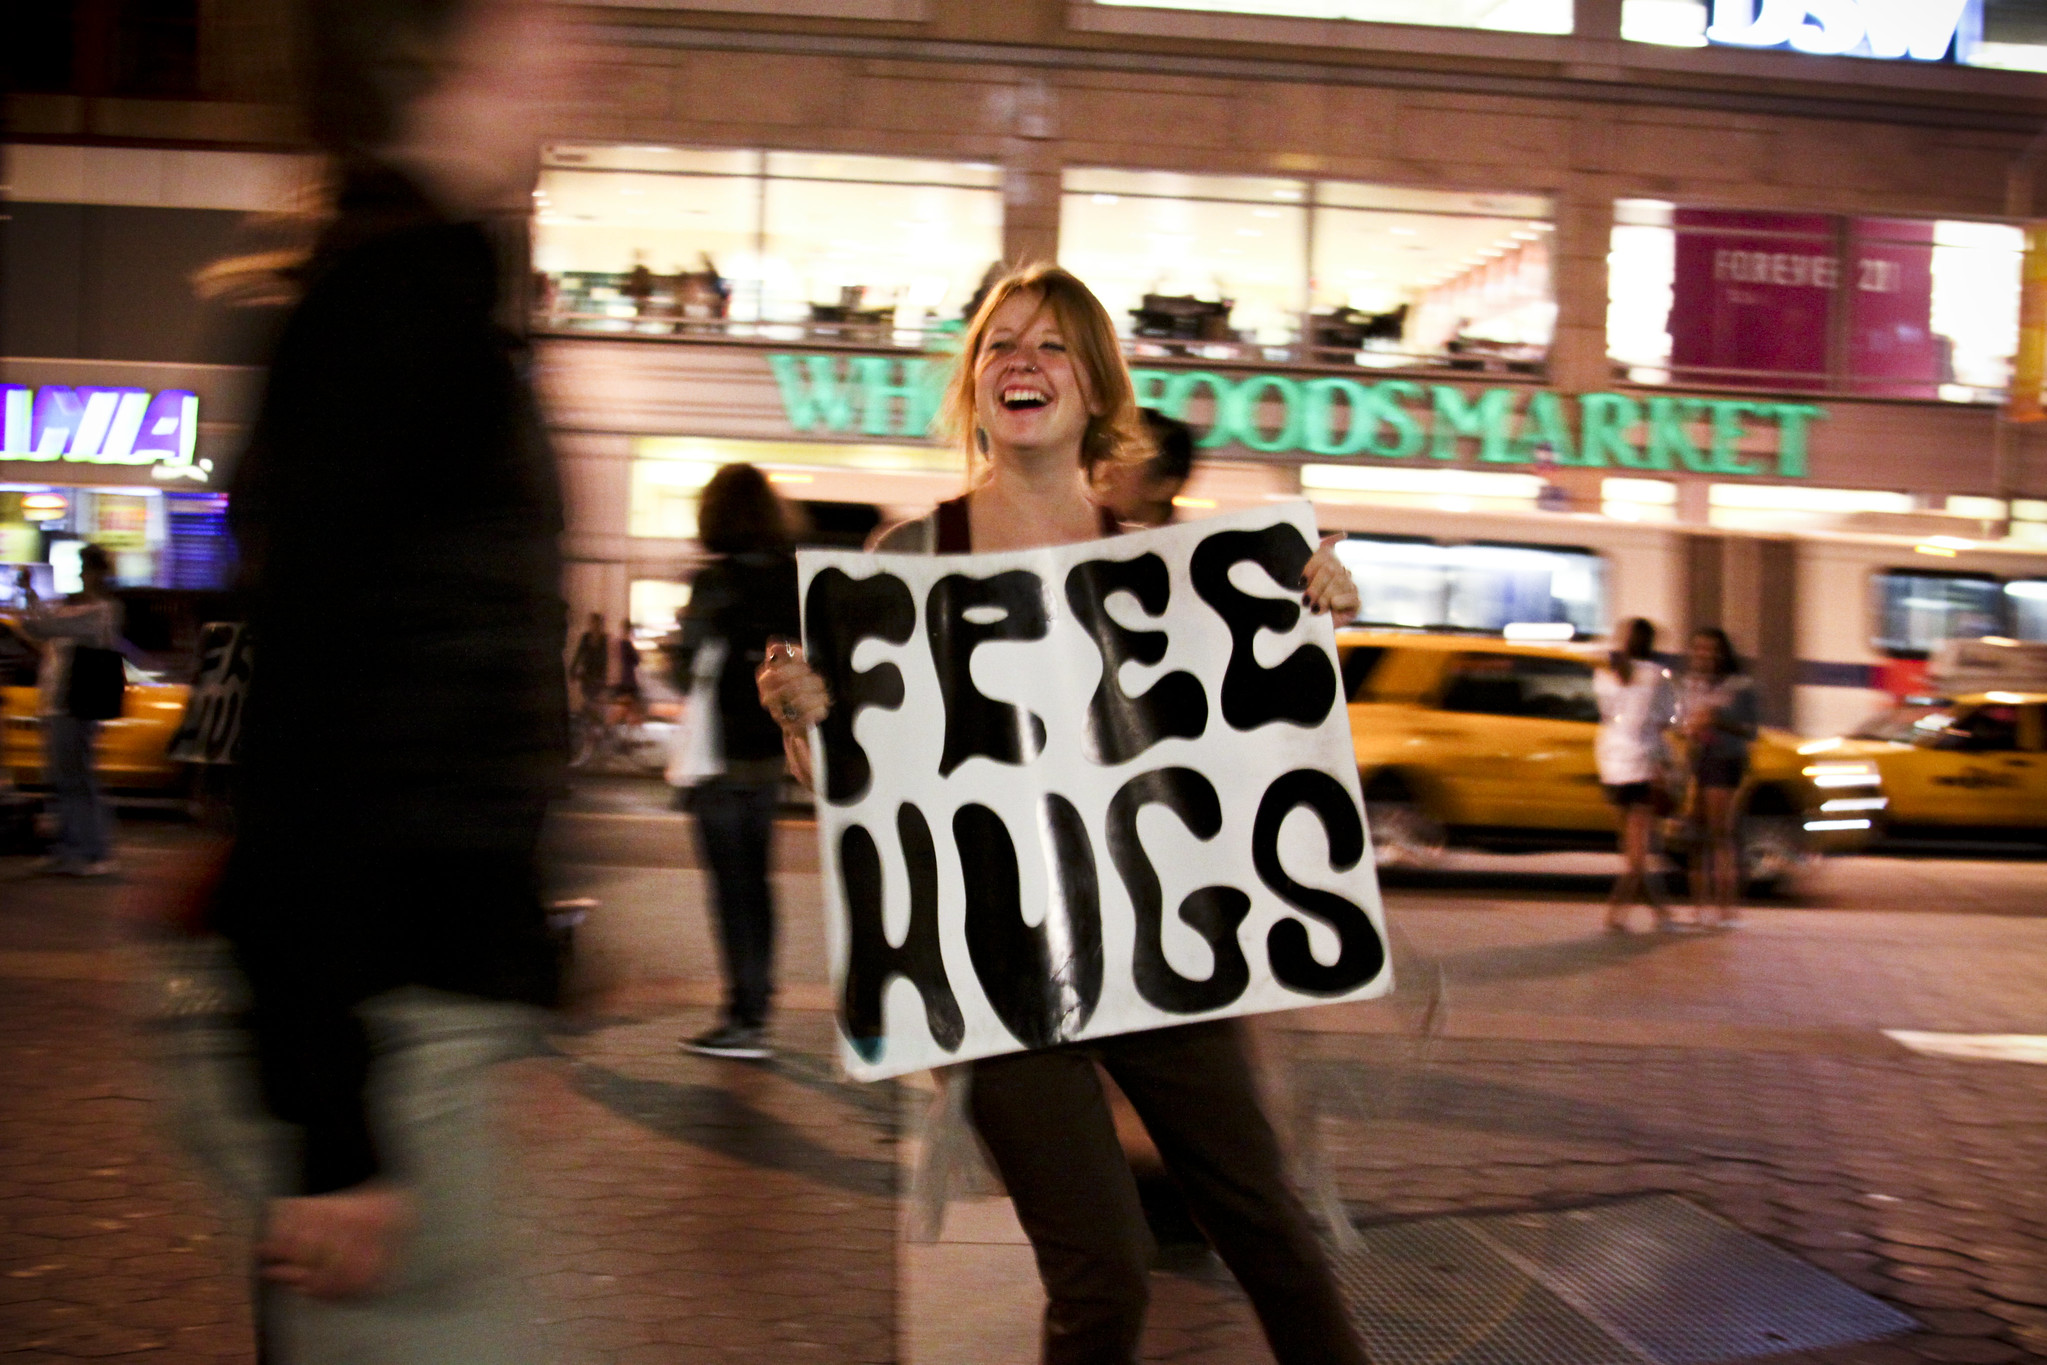 Photo of woman holding a sign that says "free hugs"